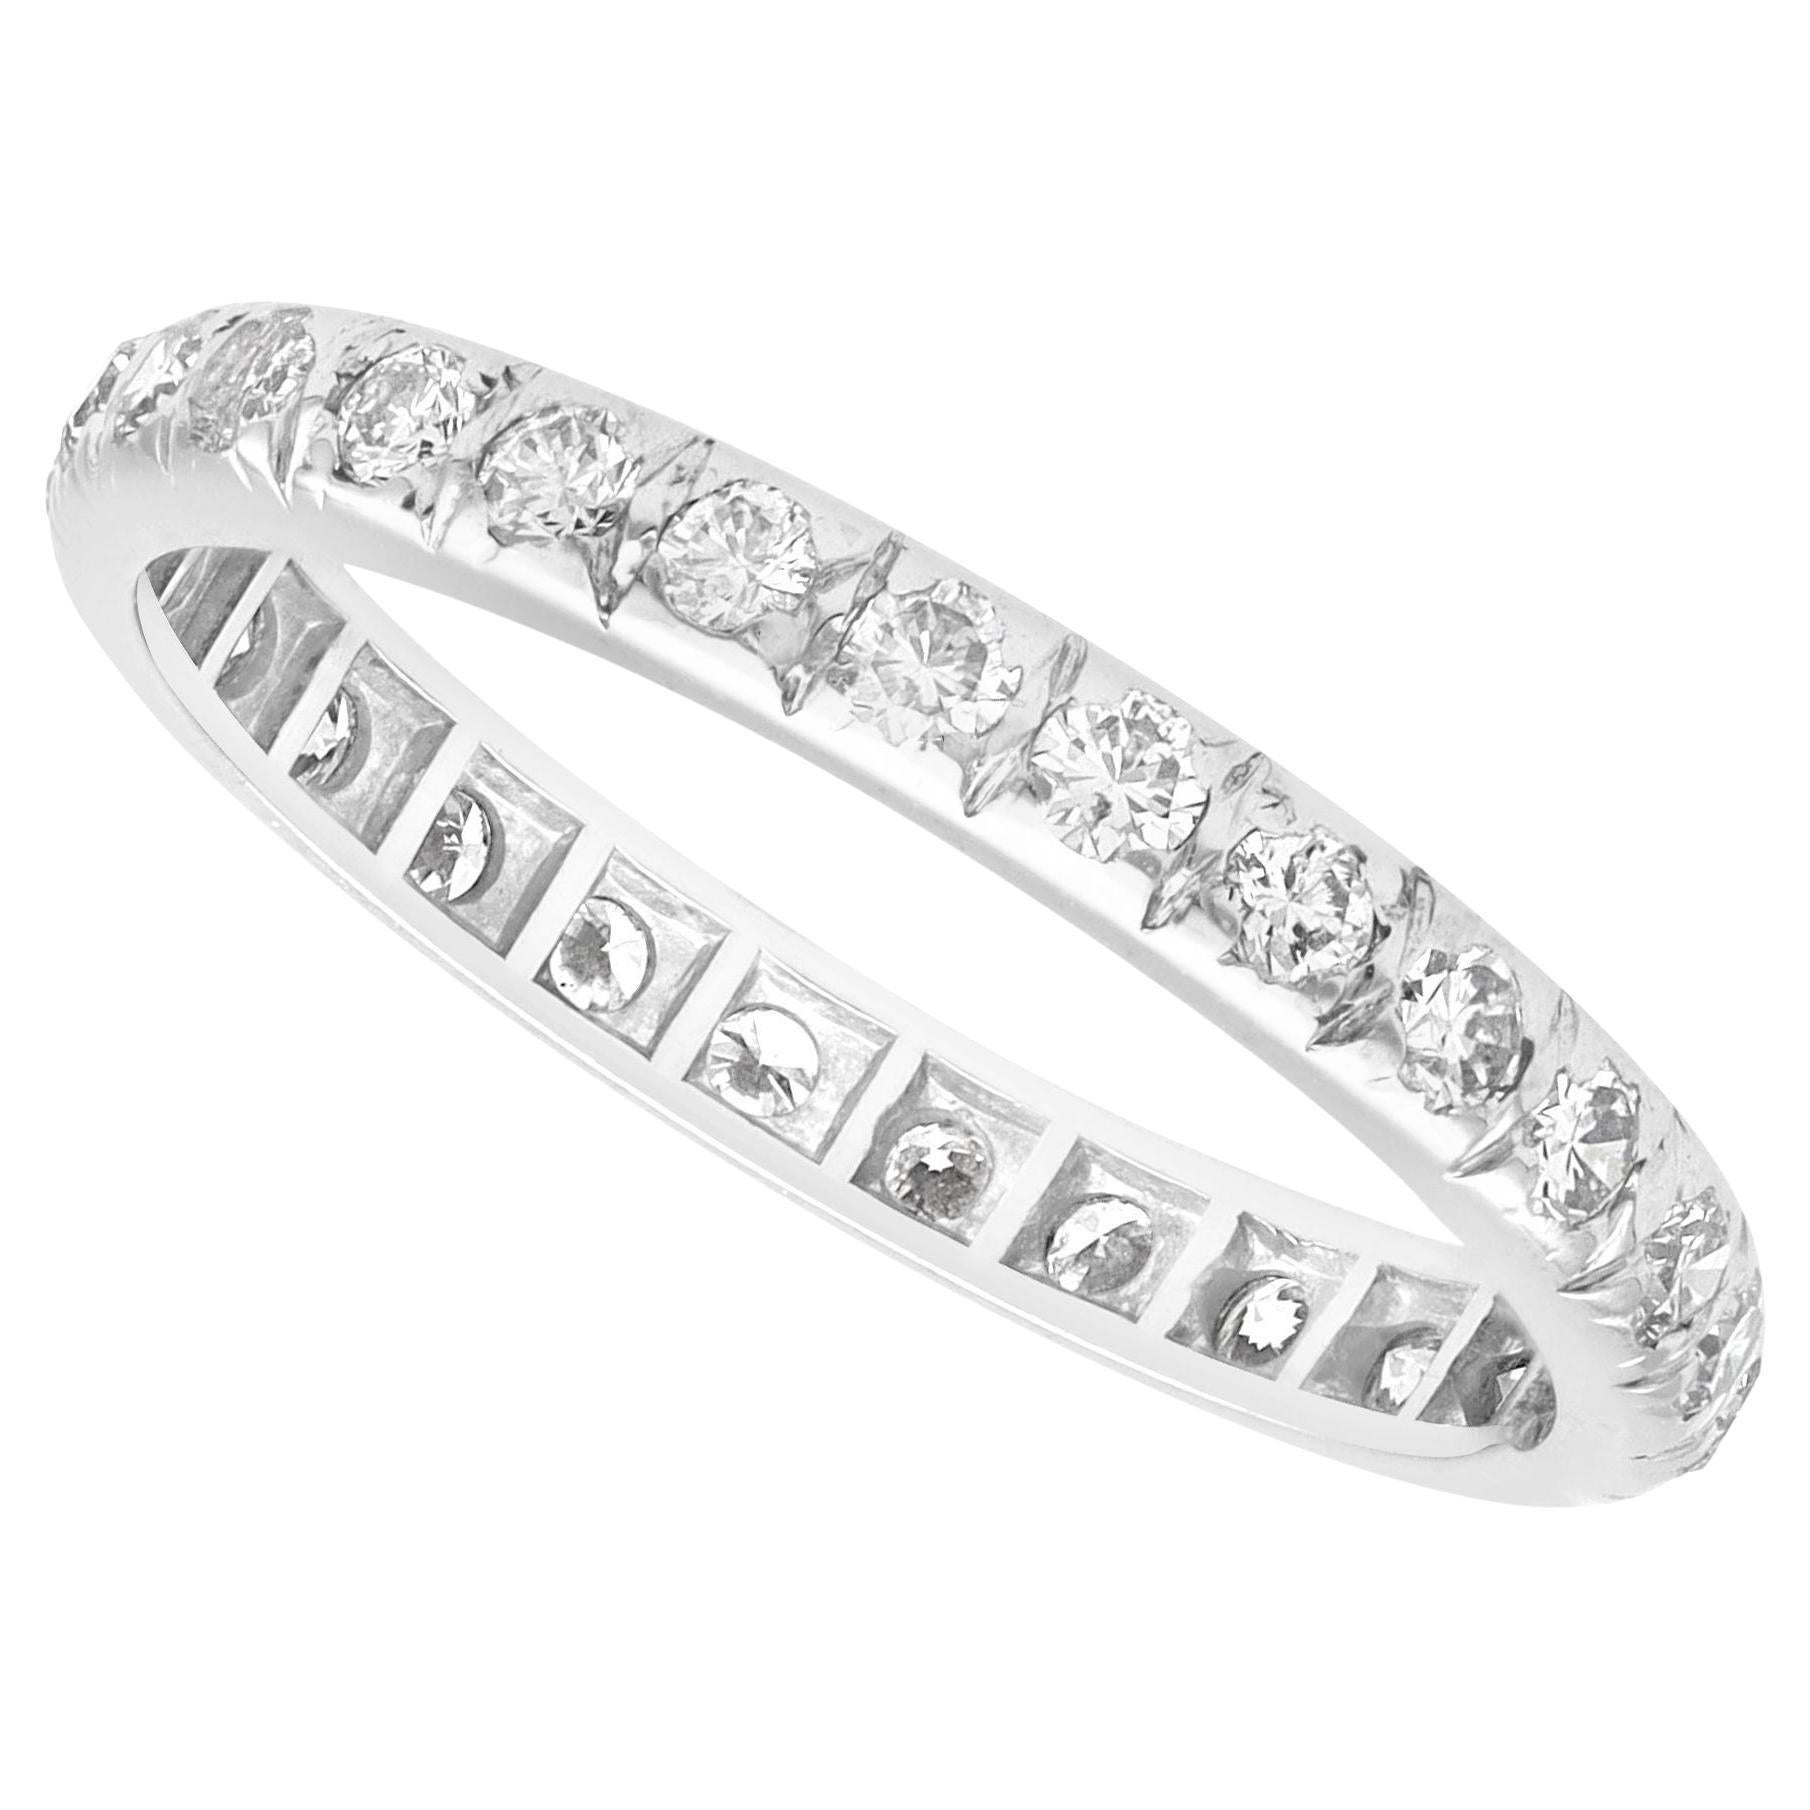 Antique French Diamond and White Gold Full Eternity Ring, Circa 1920